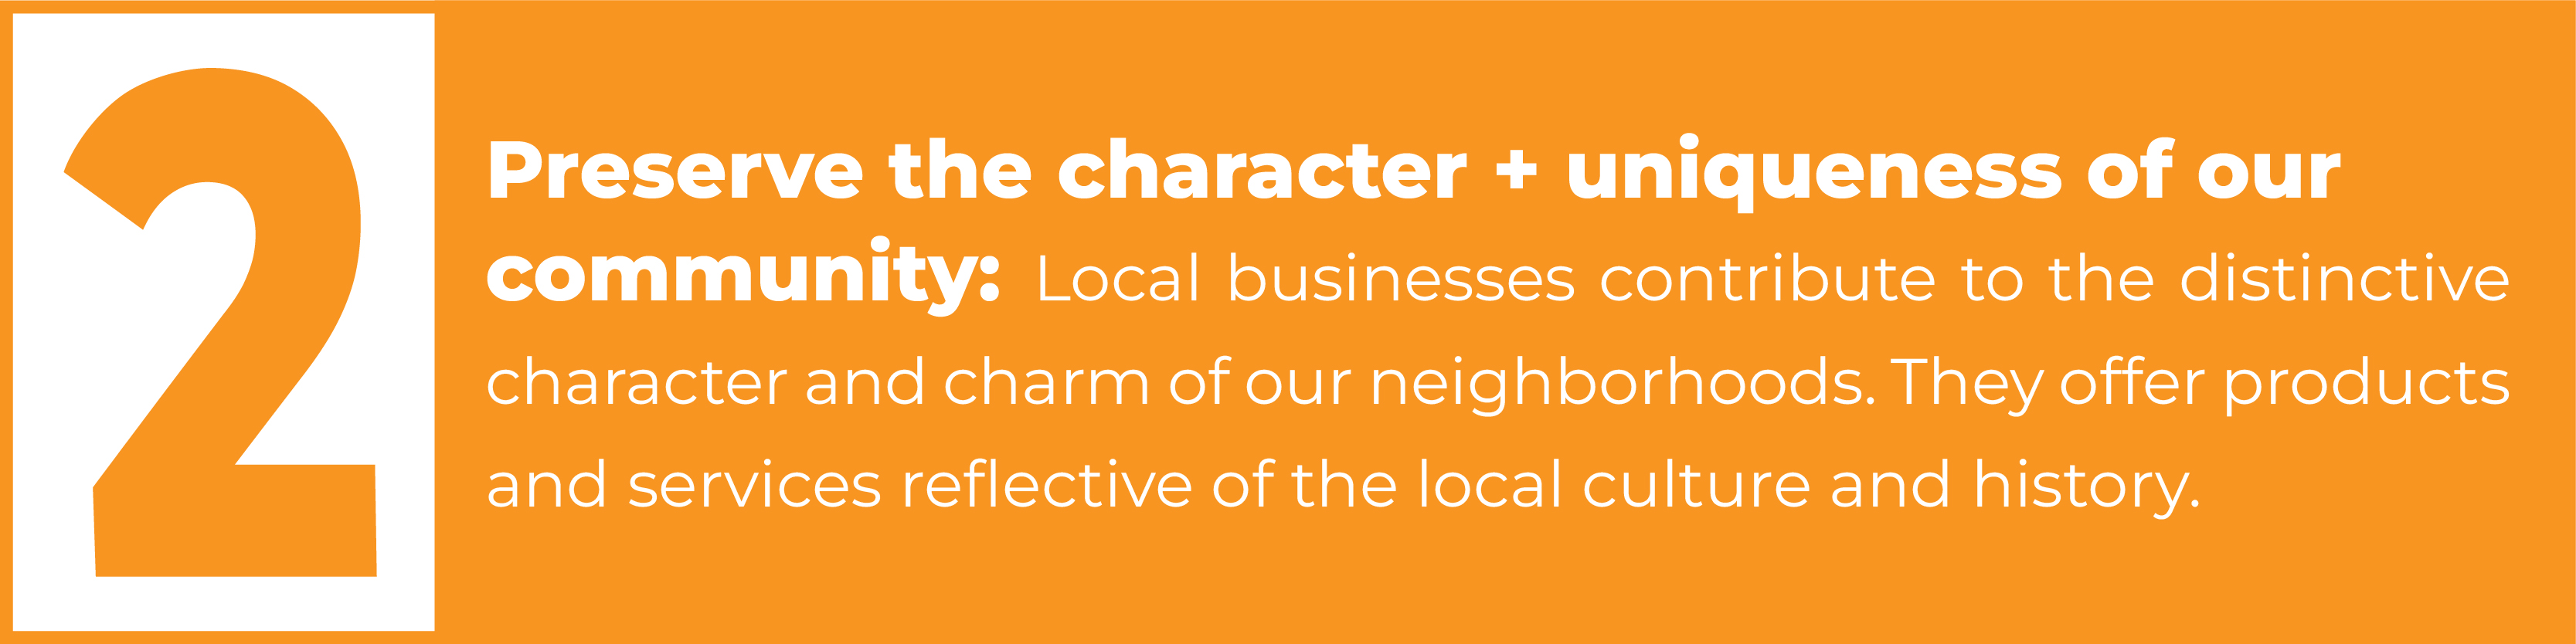 2. Preserve the character + uniqueness of our  community: Local businesses contribute to the distinctive character and charm of our neighborhoods. They offer products and services reflective of the local culture and history.